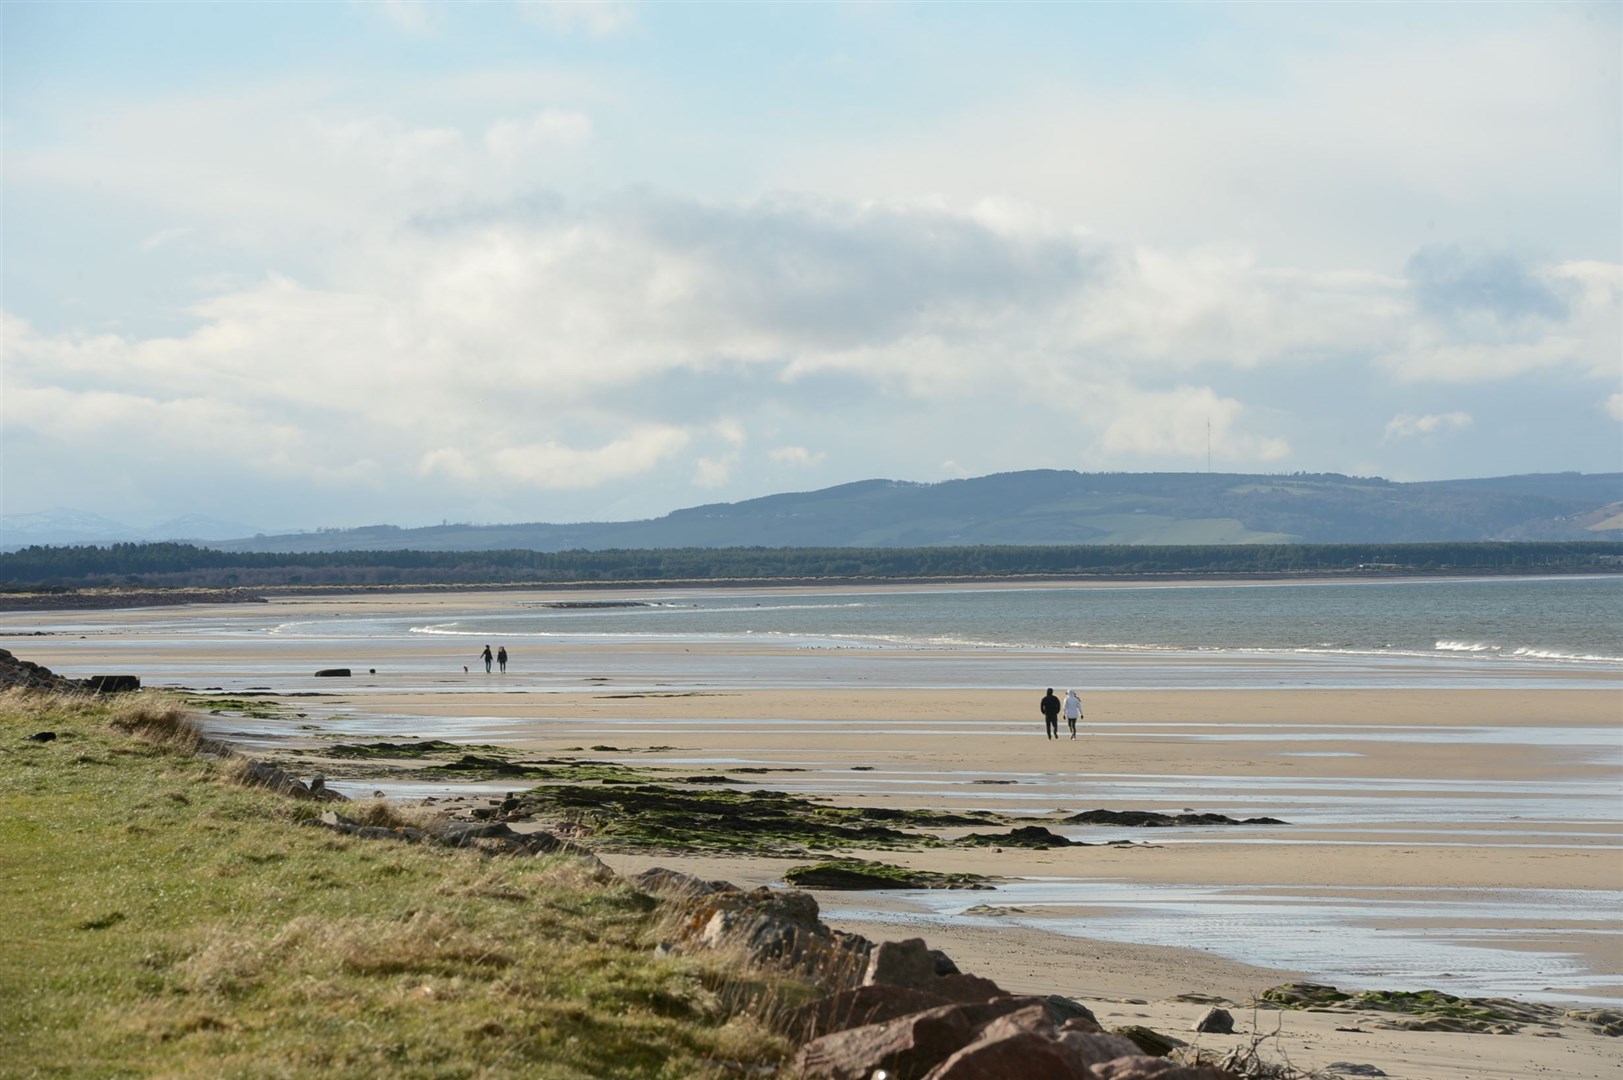 Residents are concerned that beaches such as Nairn will be busier when sunnier weather hits.